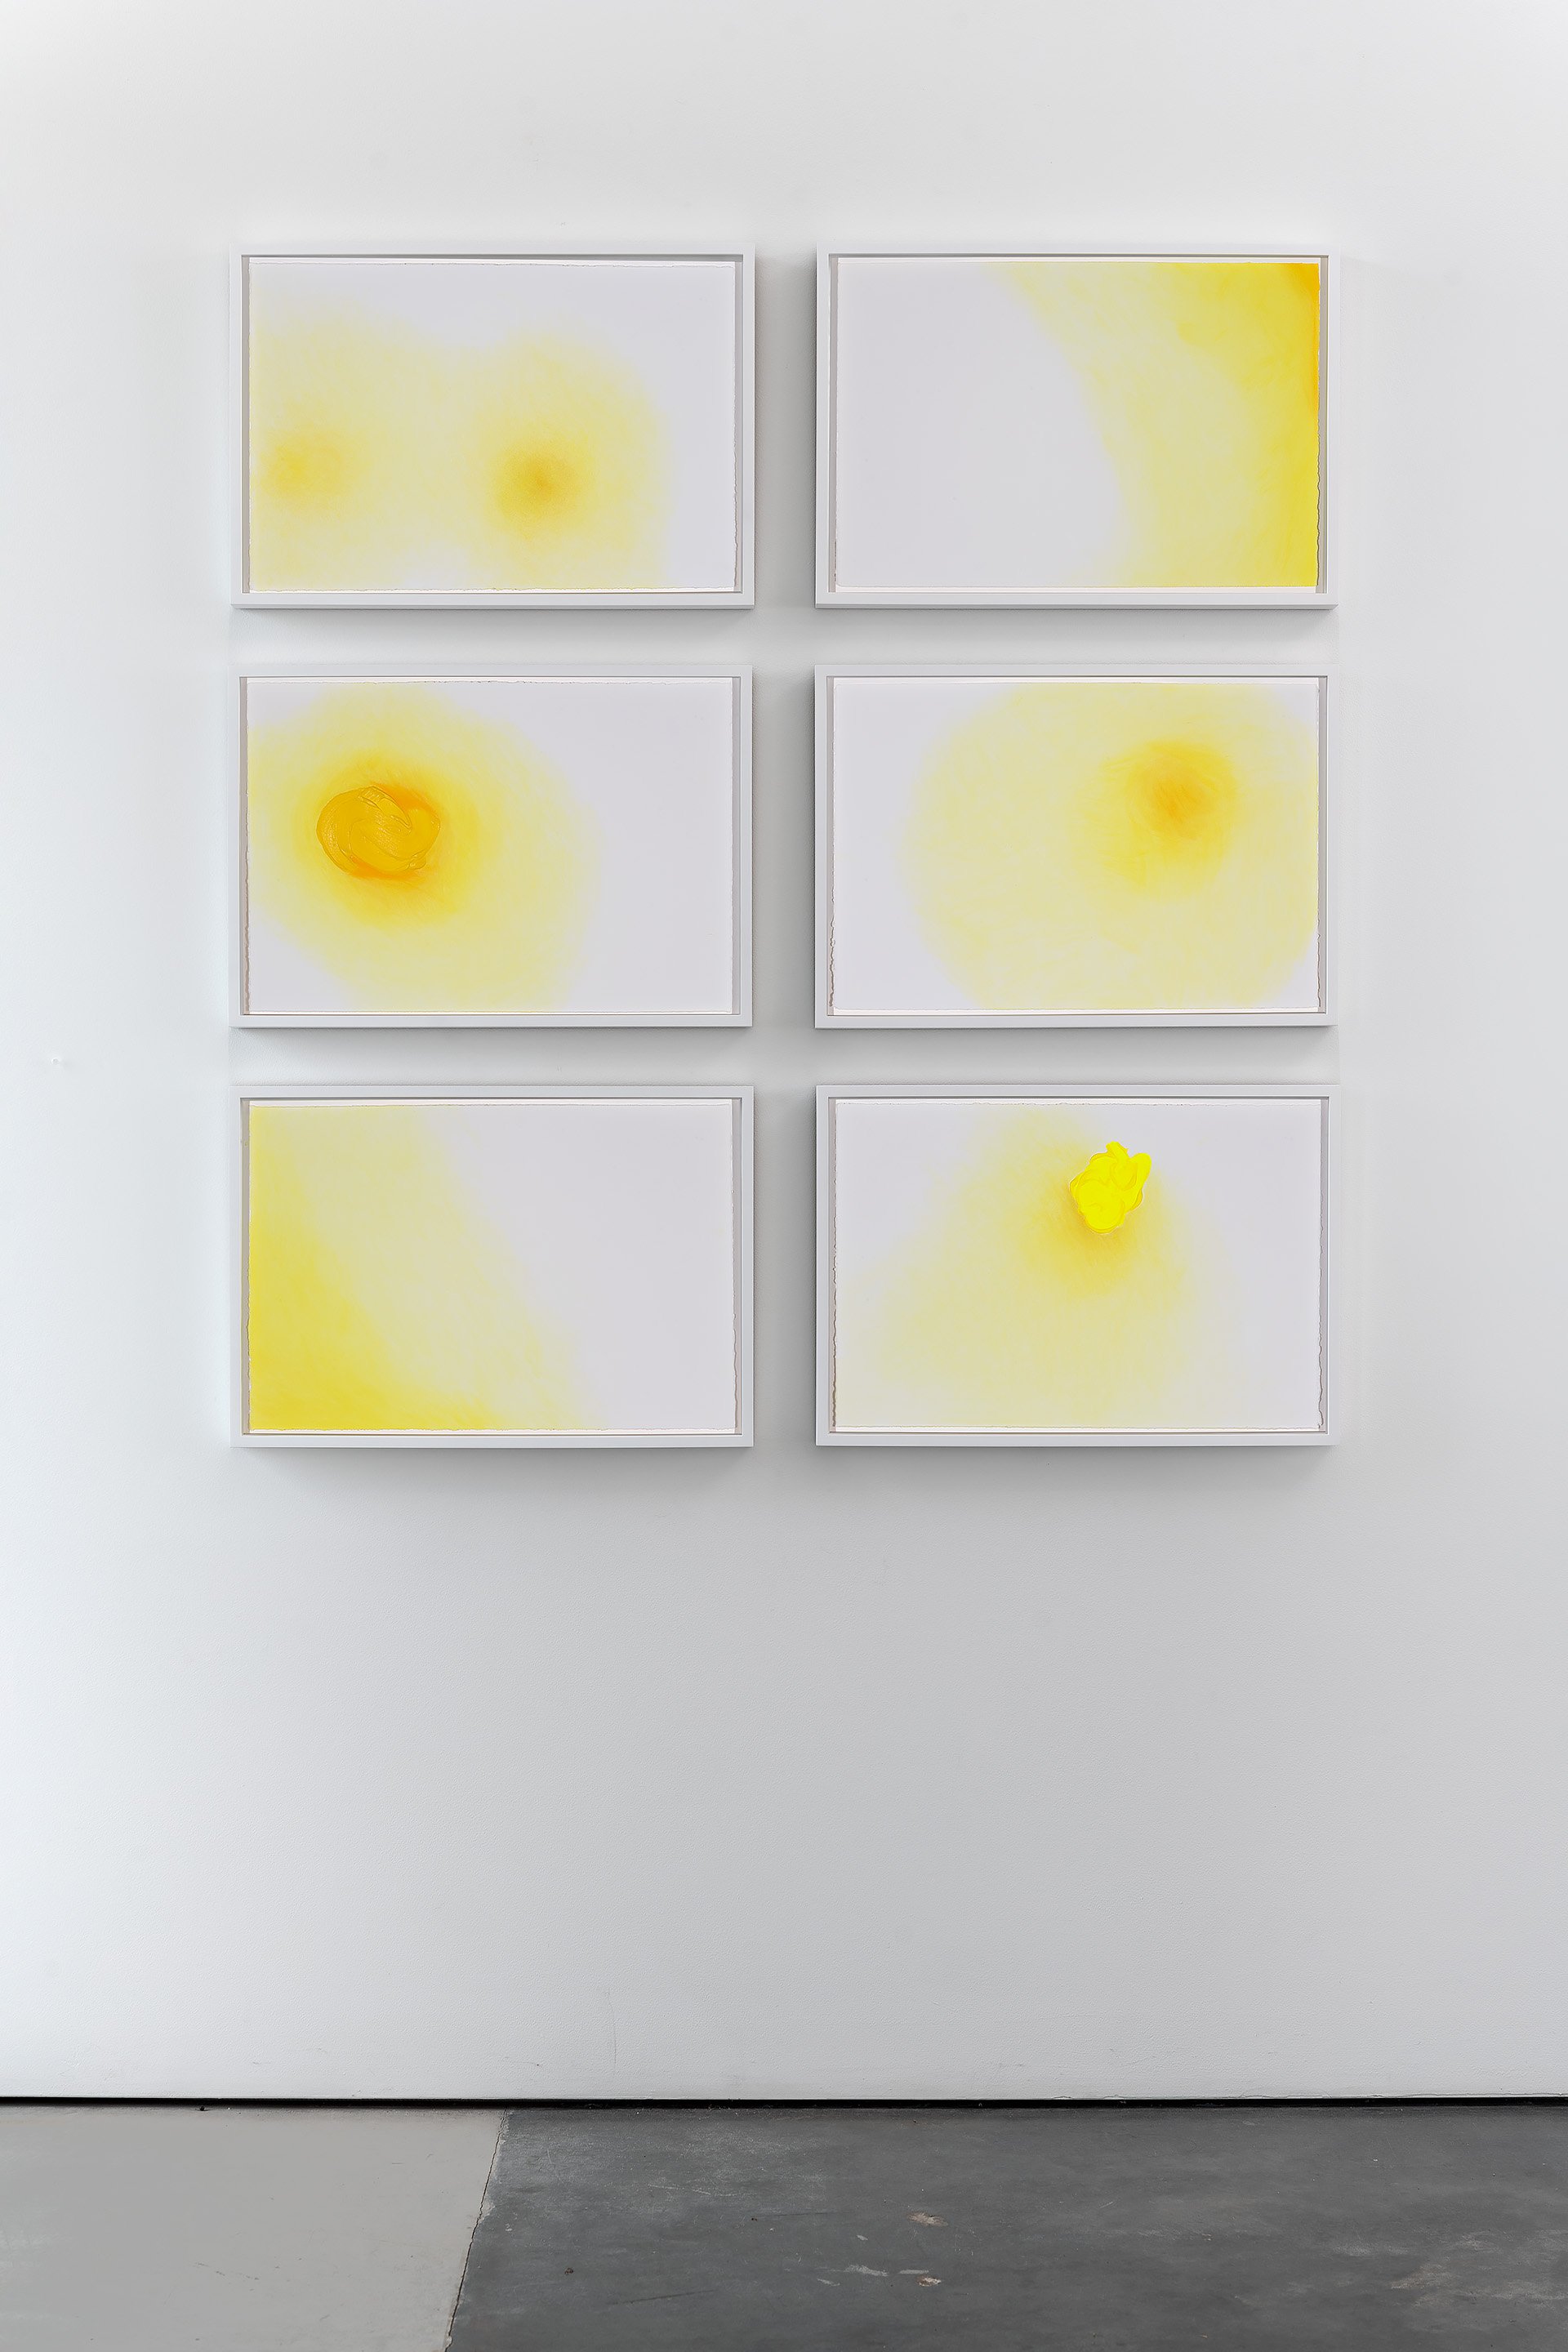    fog / sun # 1-6   2021 pastel and acrylic on cotton rag paper 15 x 22 inches each 